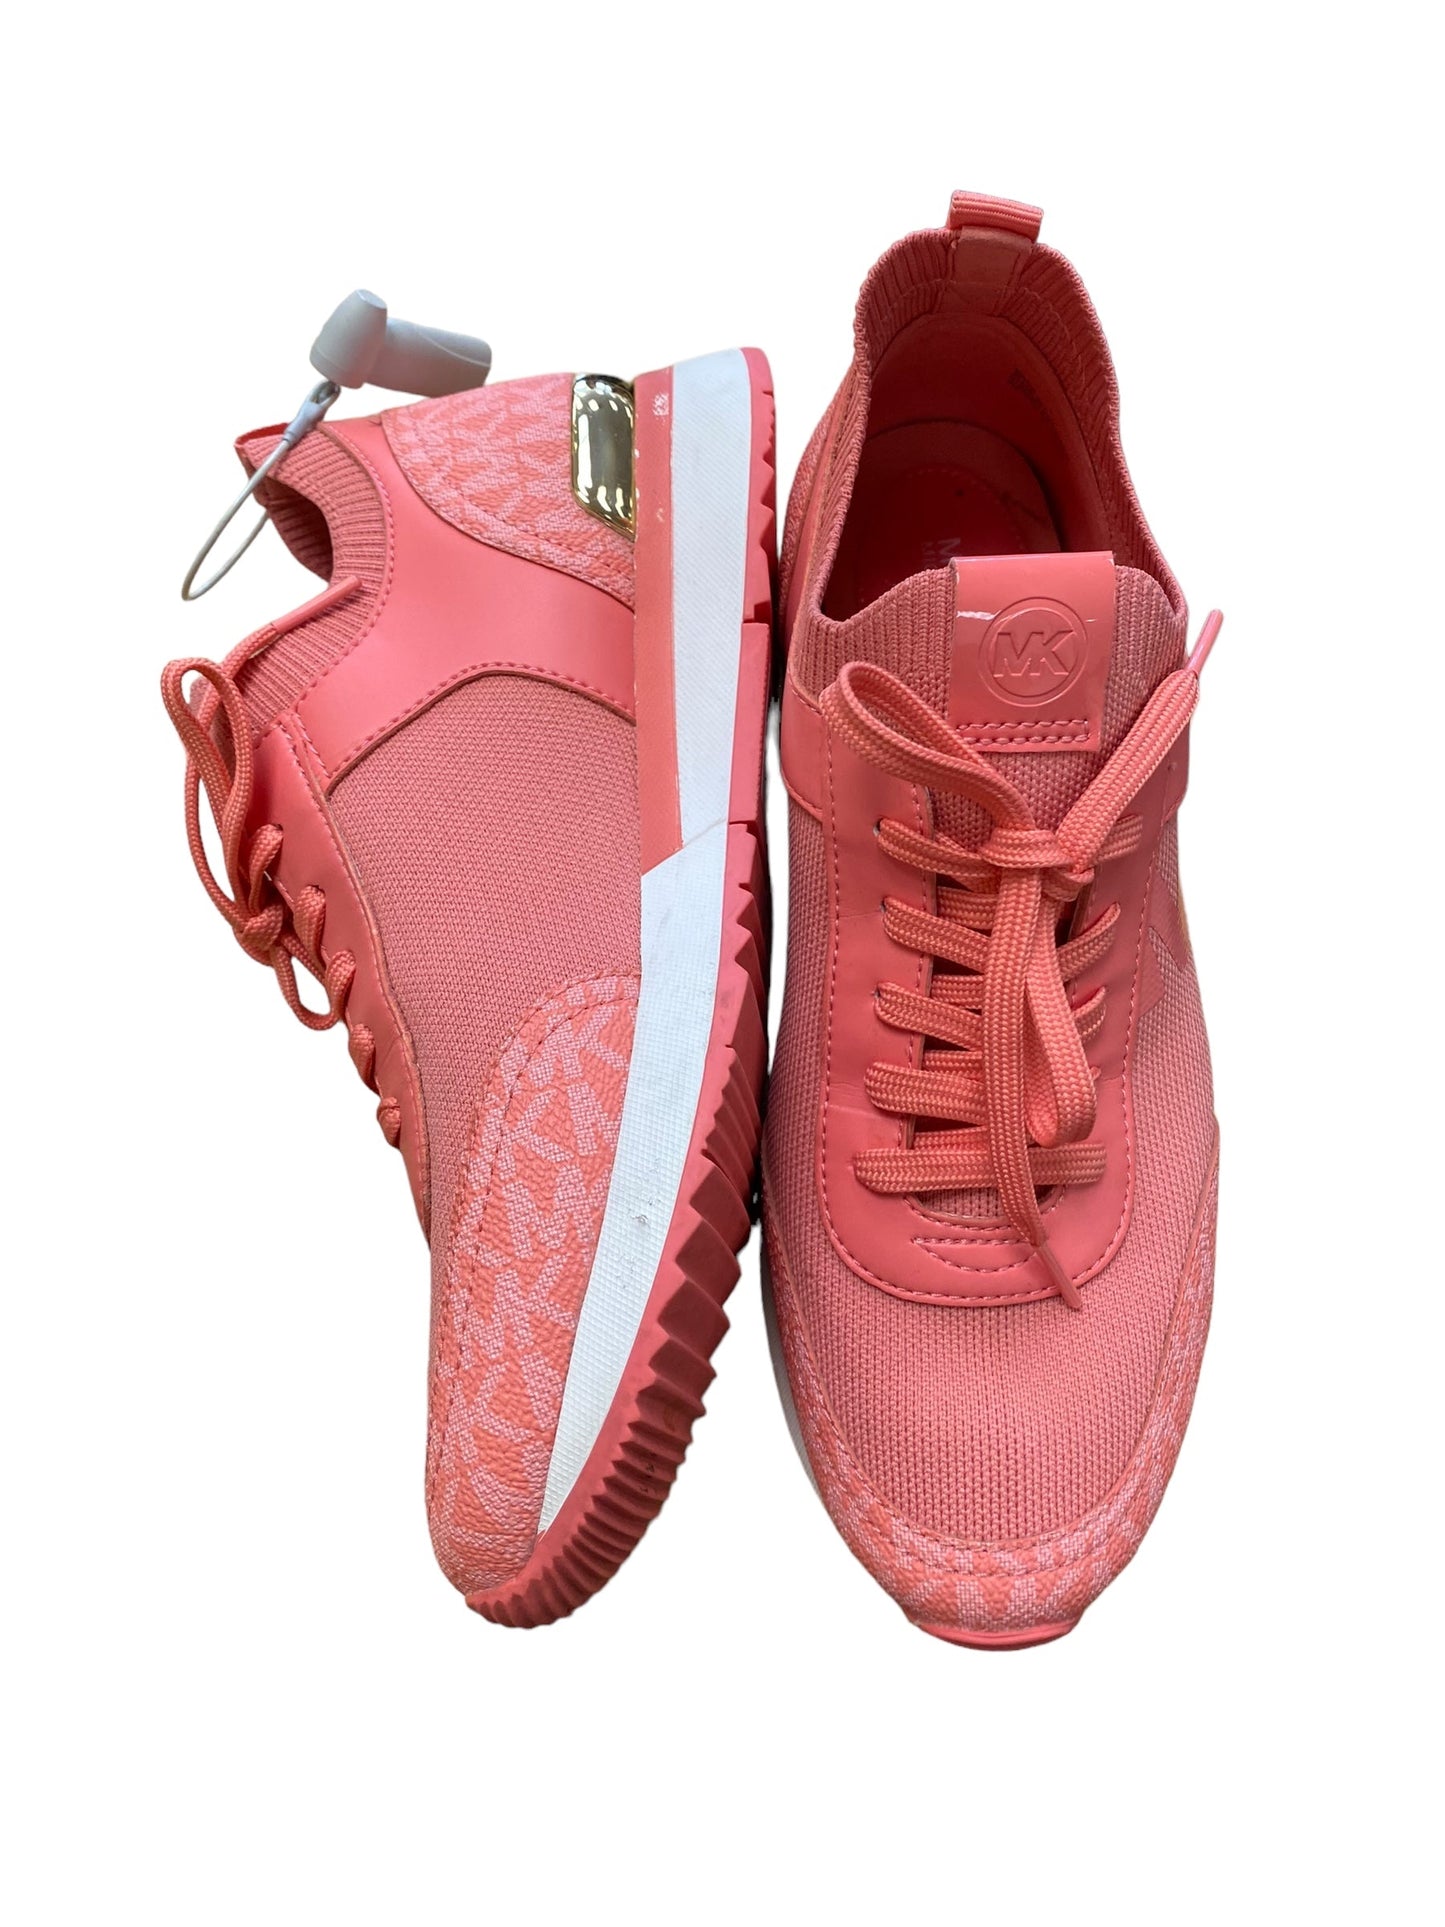 Pink Shoes Athletic Michael By Michael Kors, Size 8